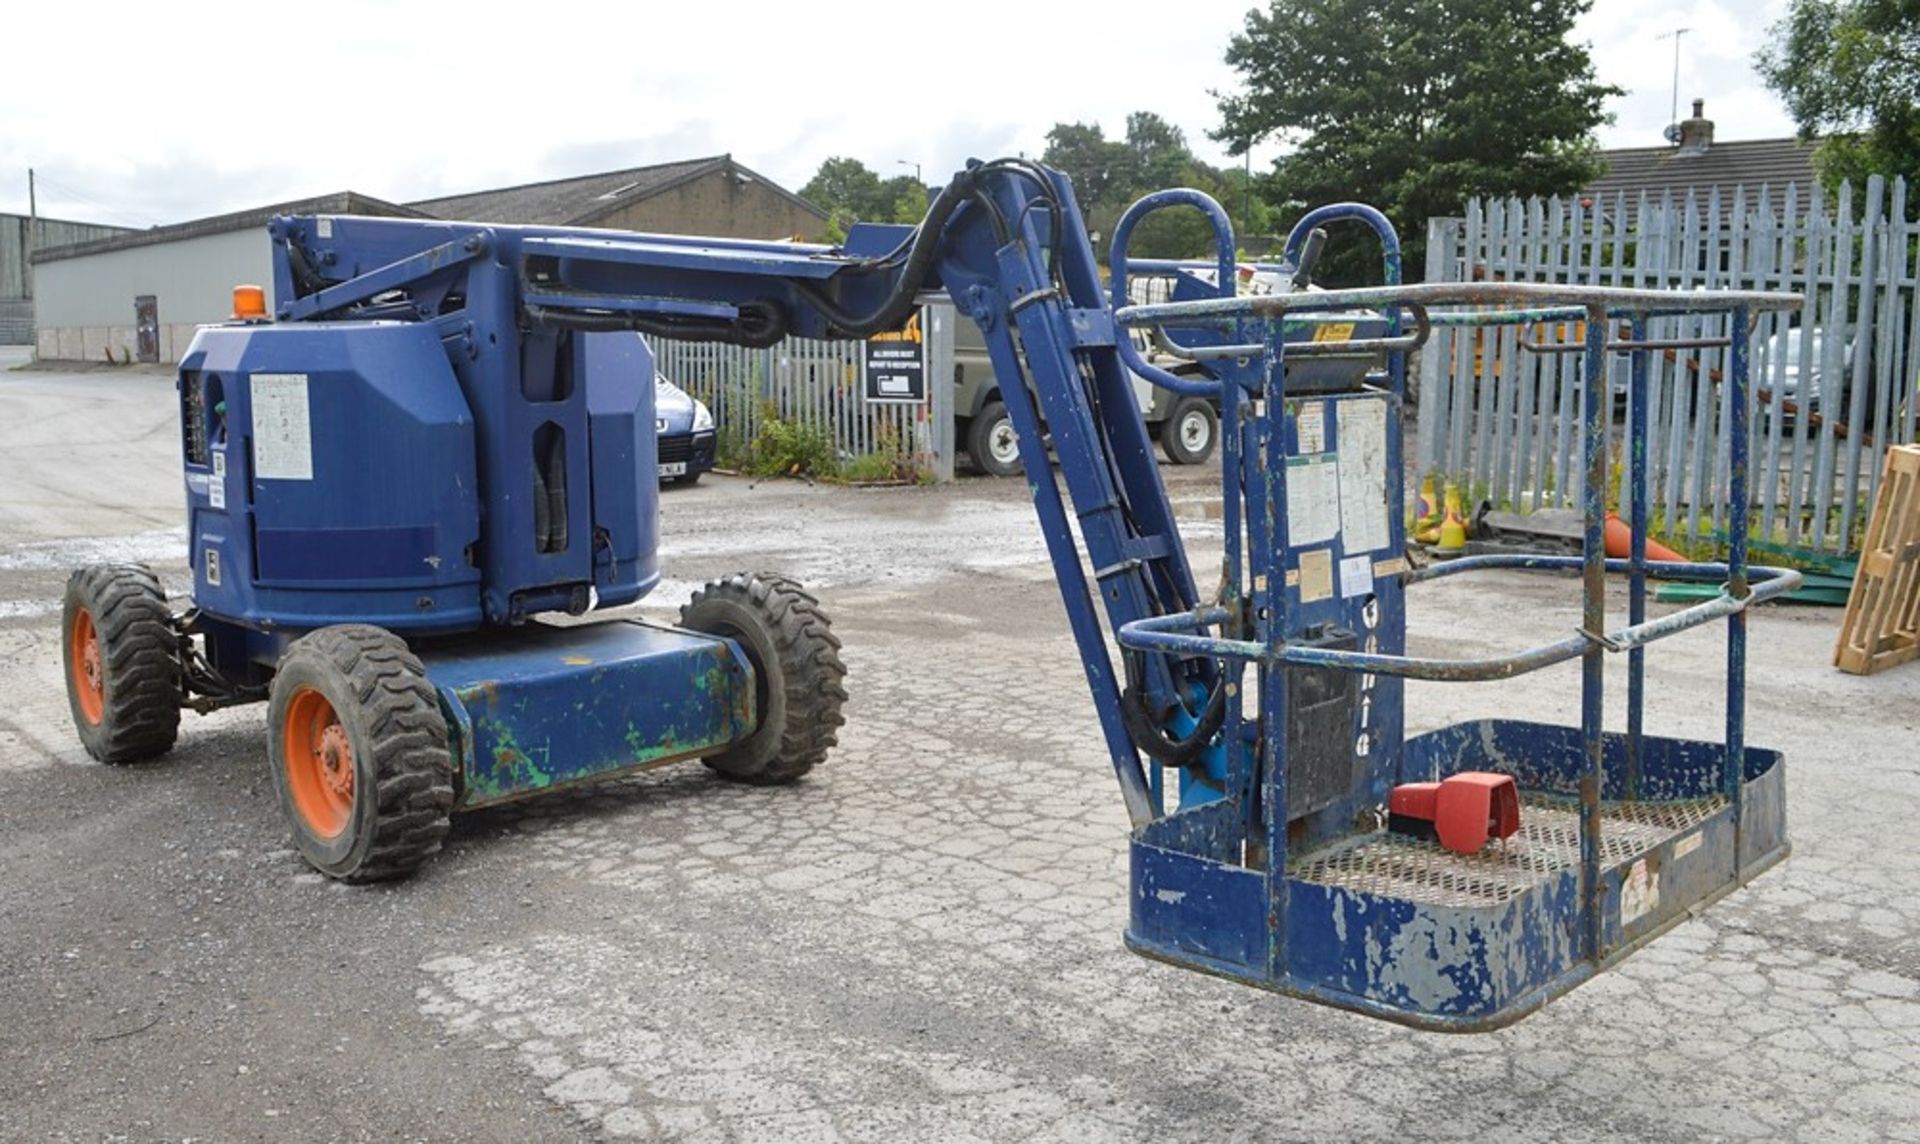 Genie Z-34/22 34 ft diesel/battery electric articulated boom access platform Year: 2000 S/N: 34-